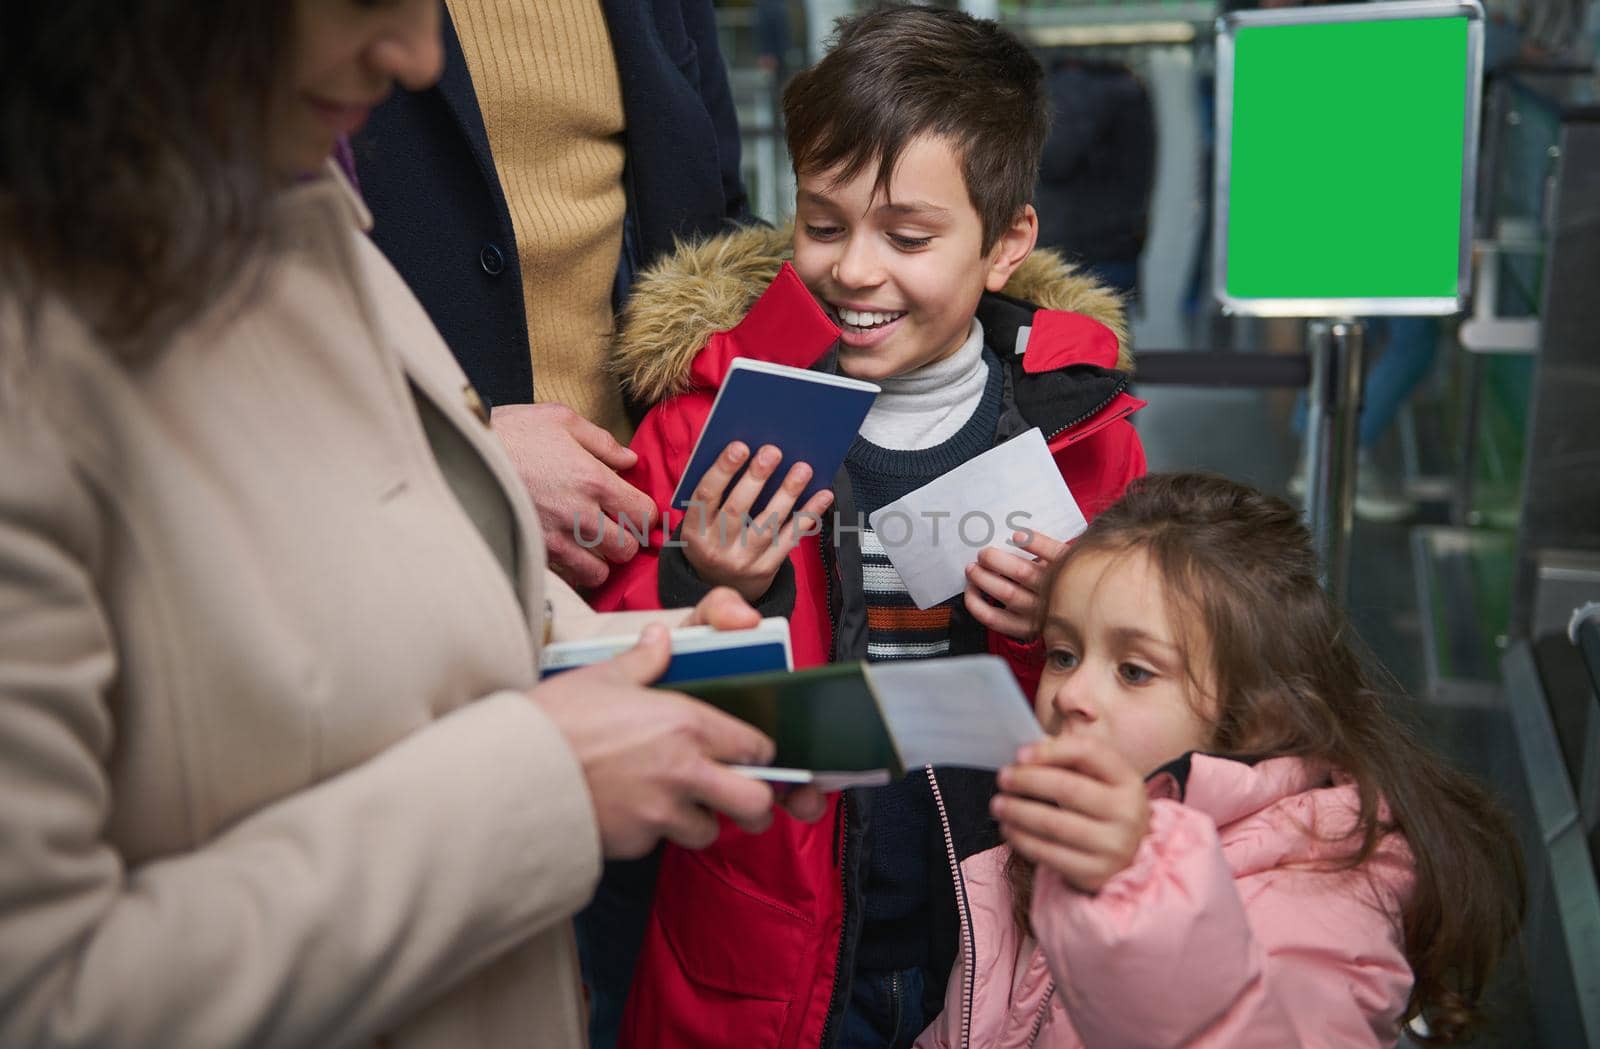 Cheerful children enjoying family travel, giving passports to their mother while passing passport and customs control in the airport. Air travel journey concept